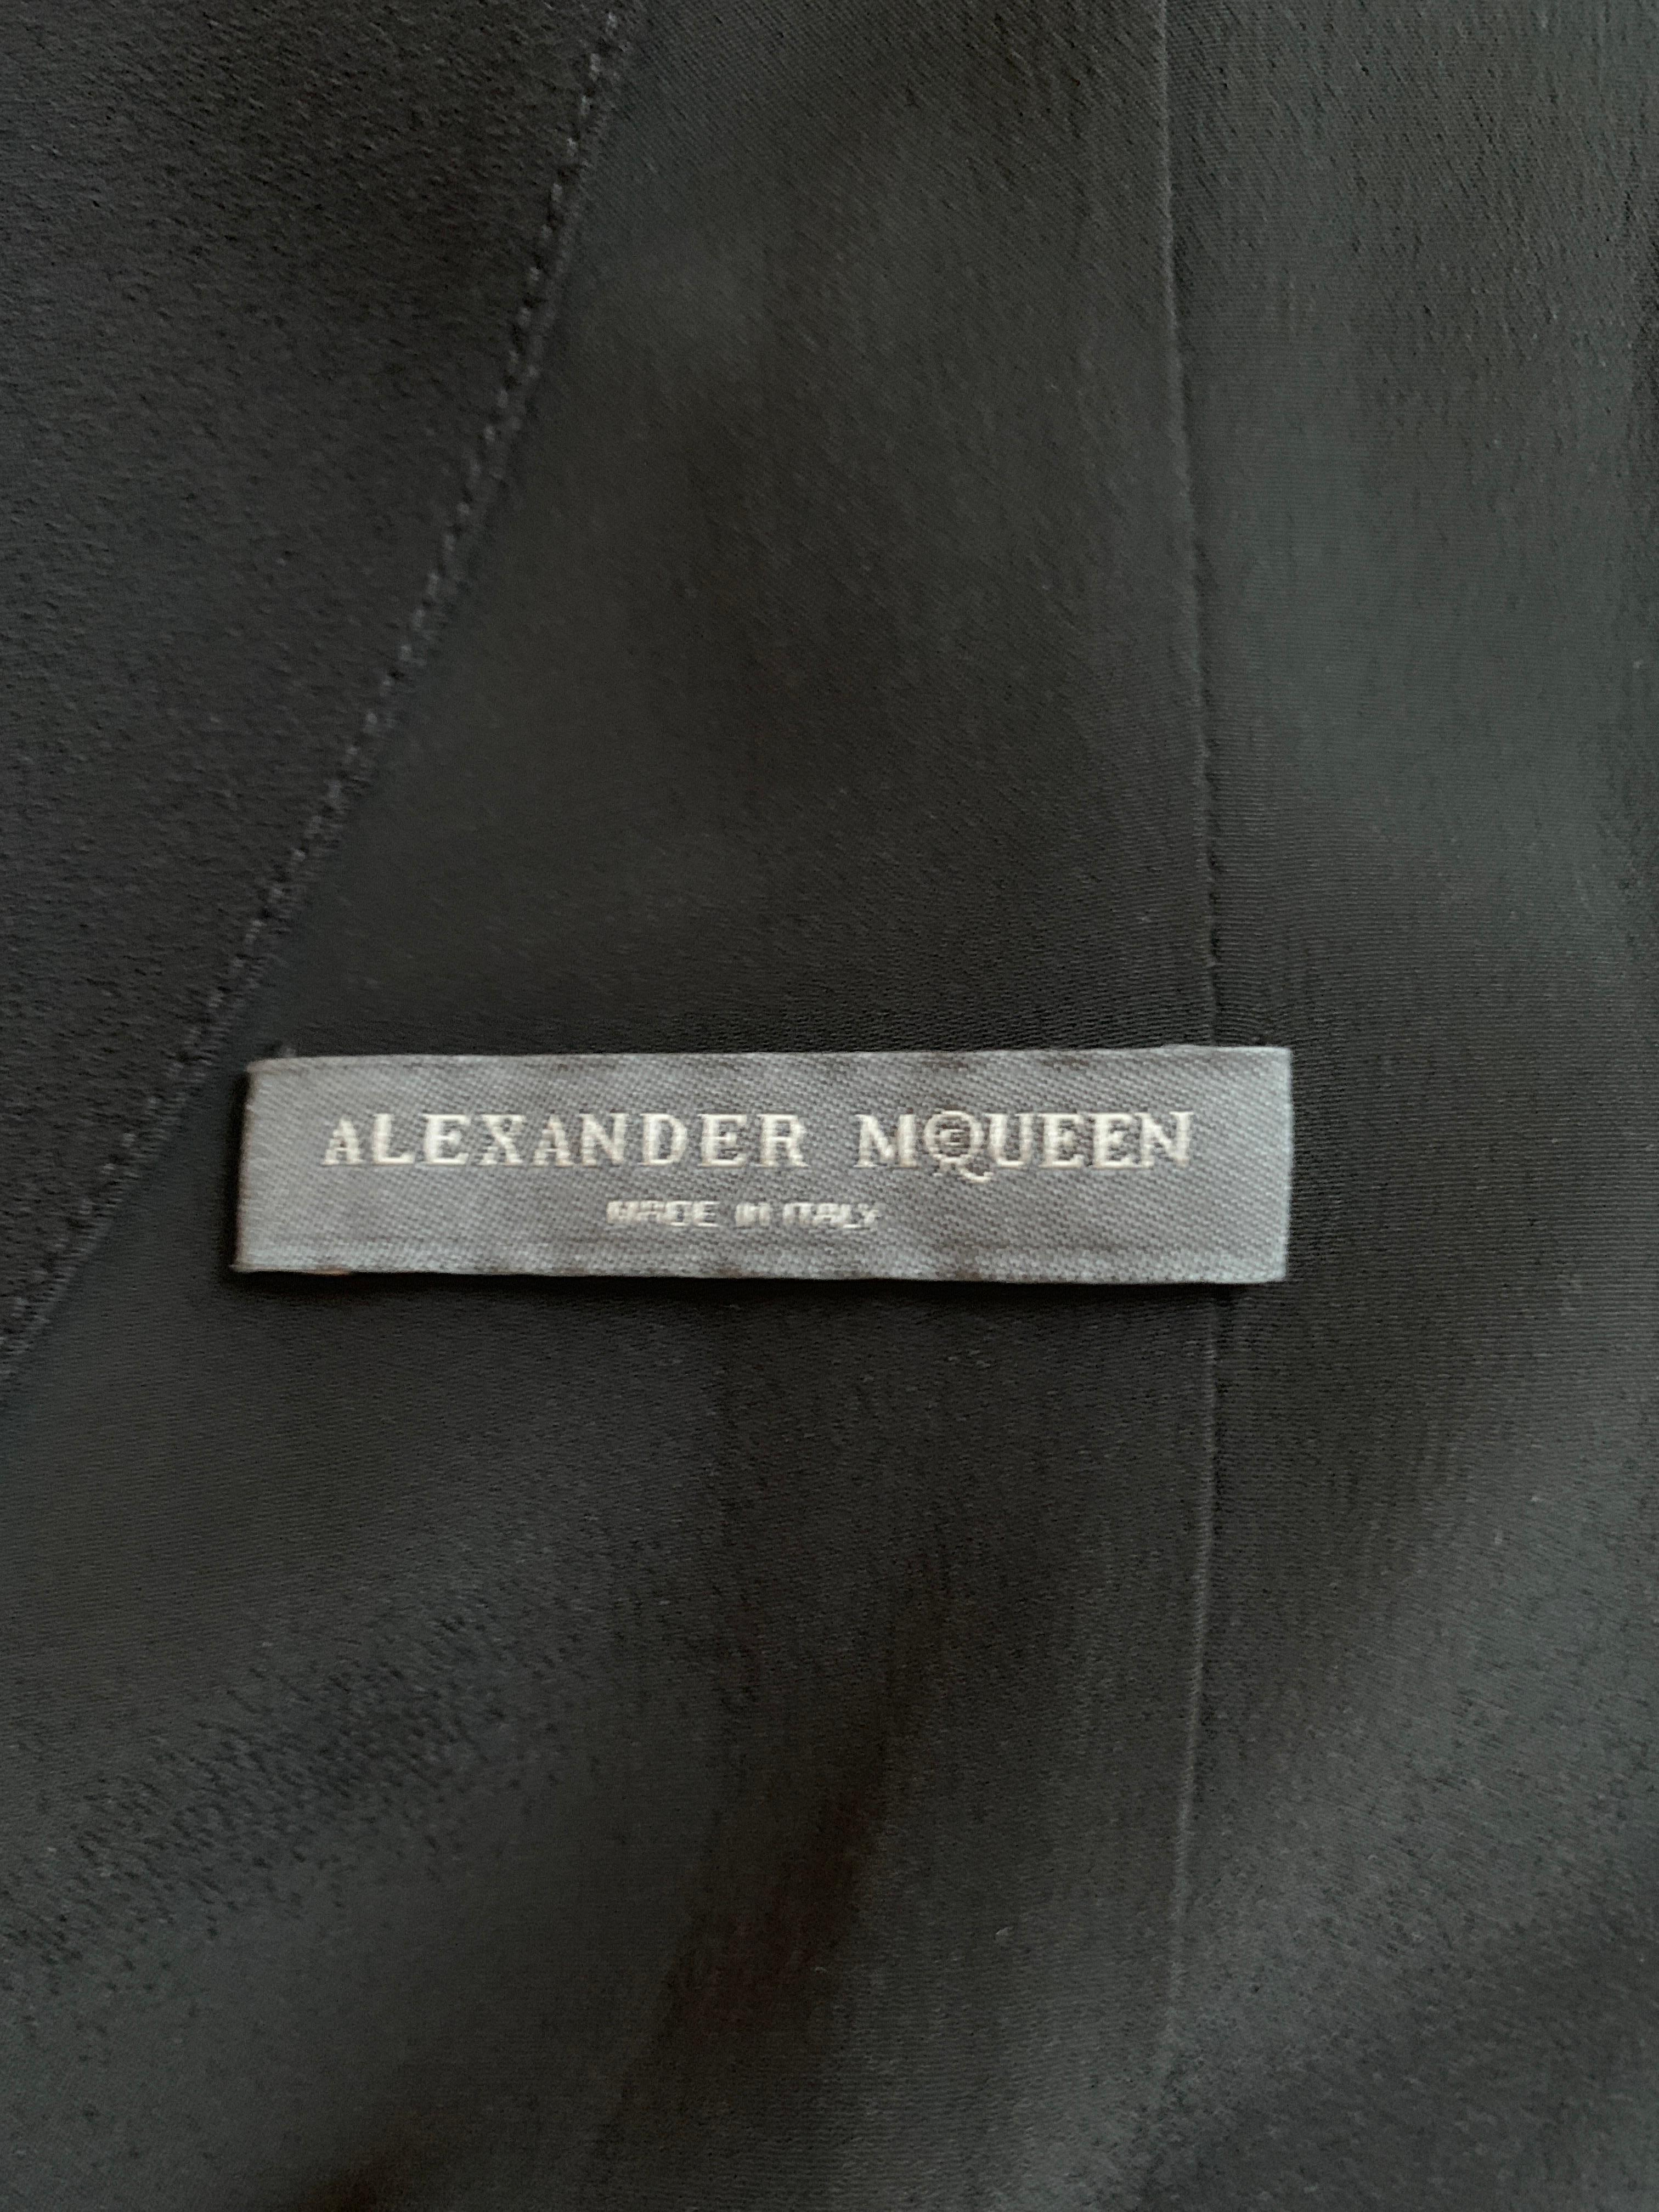 Alexander McQueen 2008 Black Drop Waist Dress with Pink Silk Band Detail In Excellent Condition For Sale In San Francisco, CA